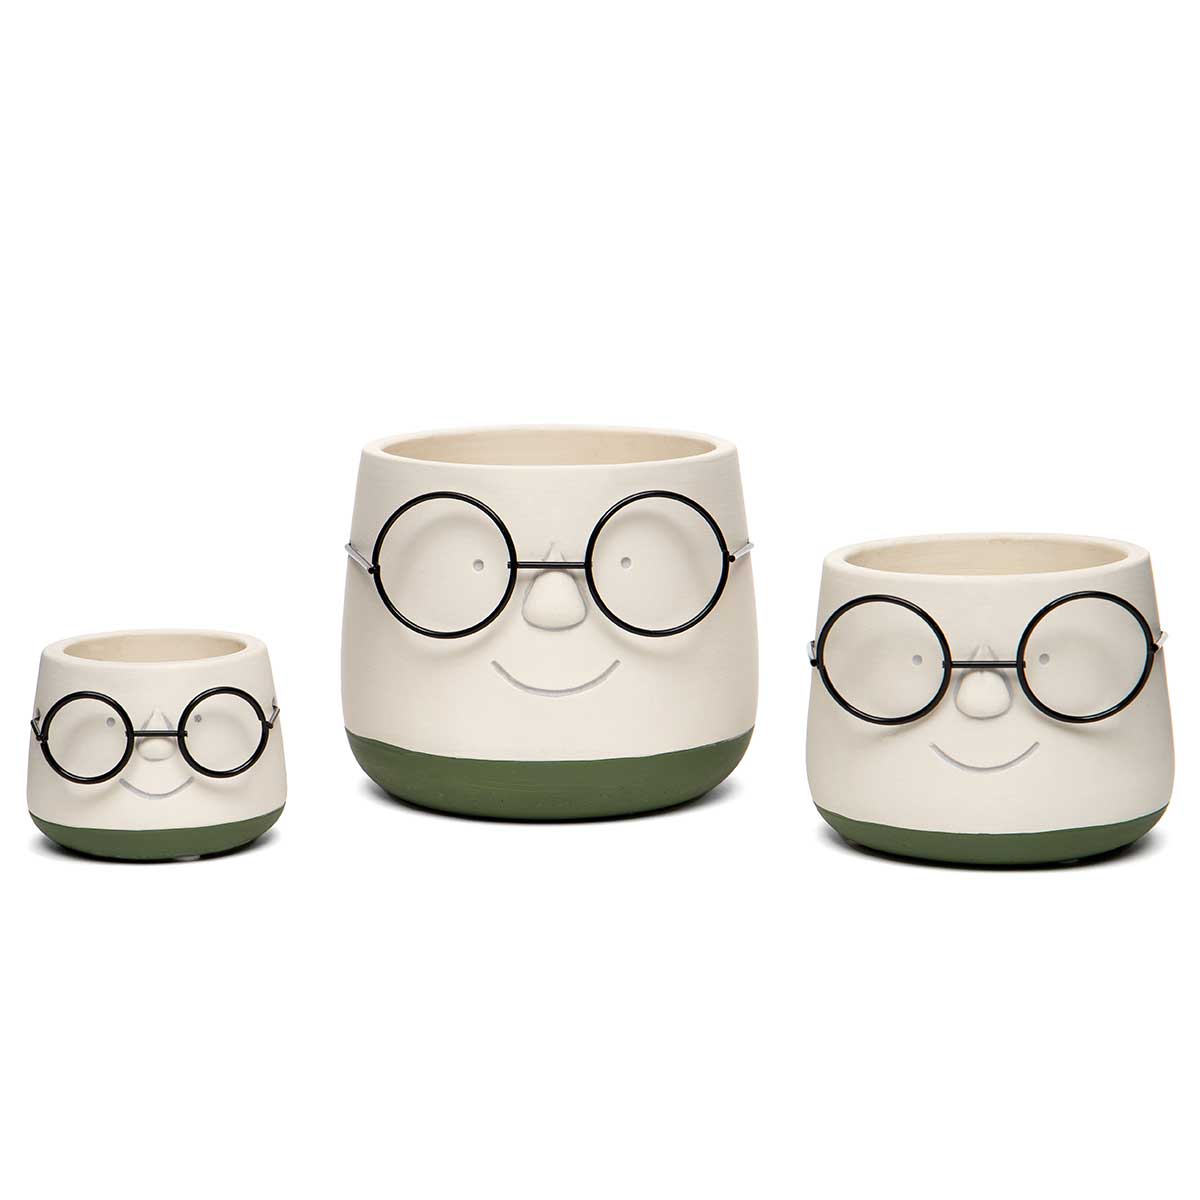 POT POINDEXTER MEDIUM 5IN X 4IN WHITE/GREEN FACE/WIRE GLASSES